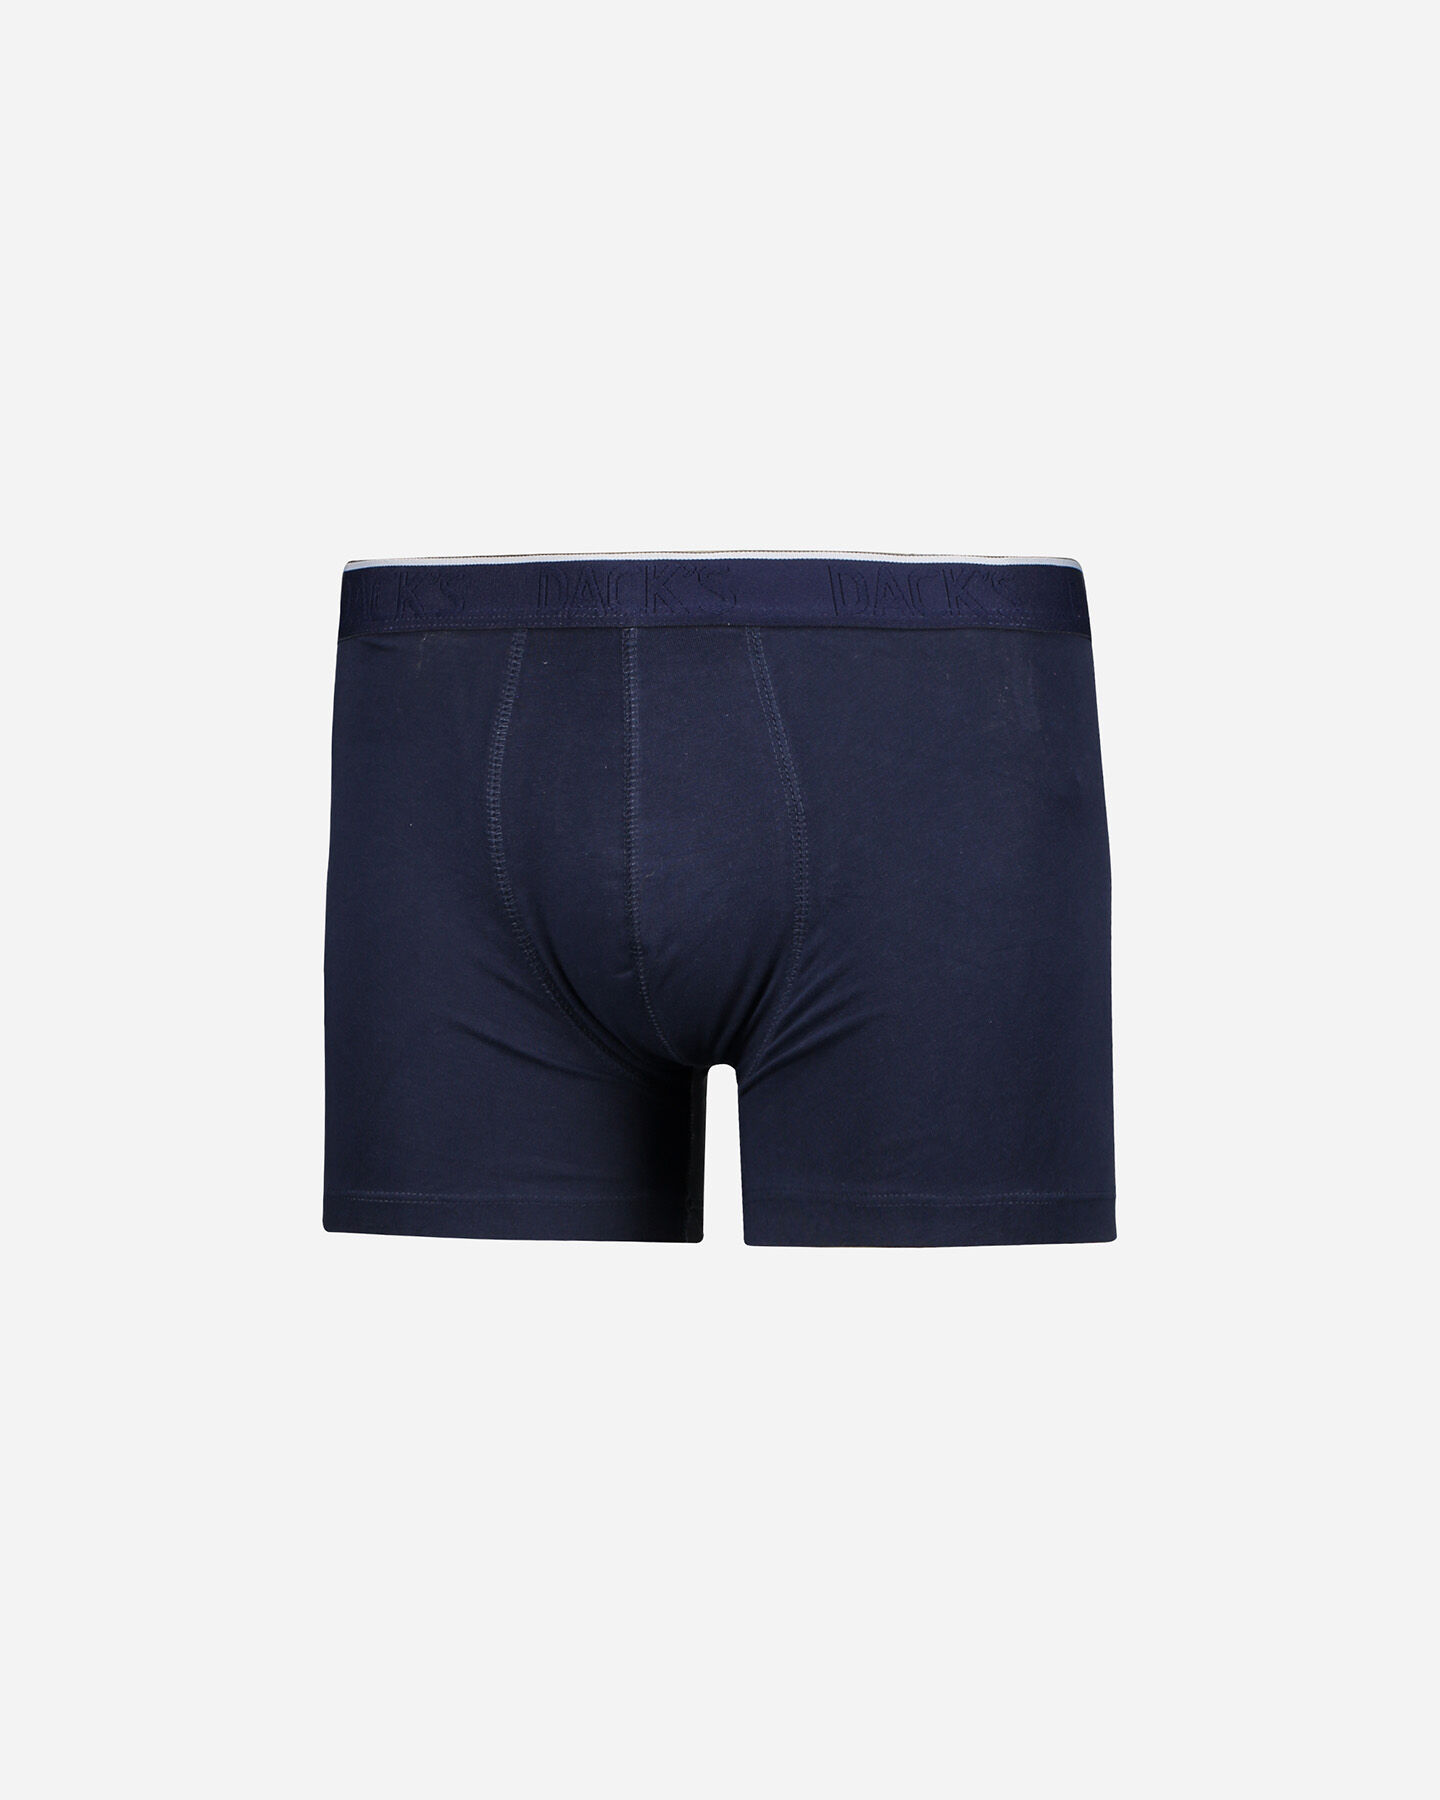  Intimo DACK'S BIPACK BASIC BOXER M S4061965 scatto 2